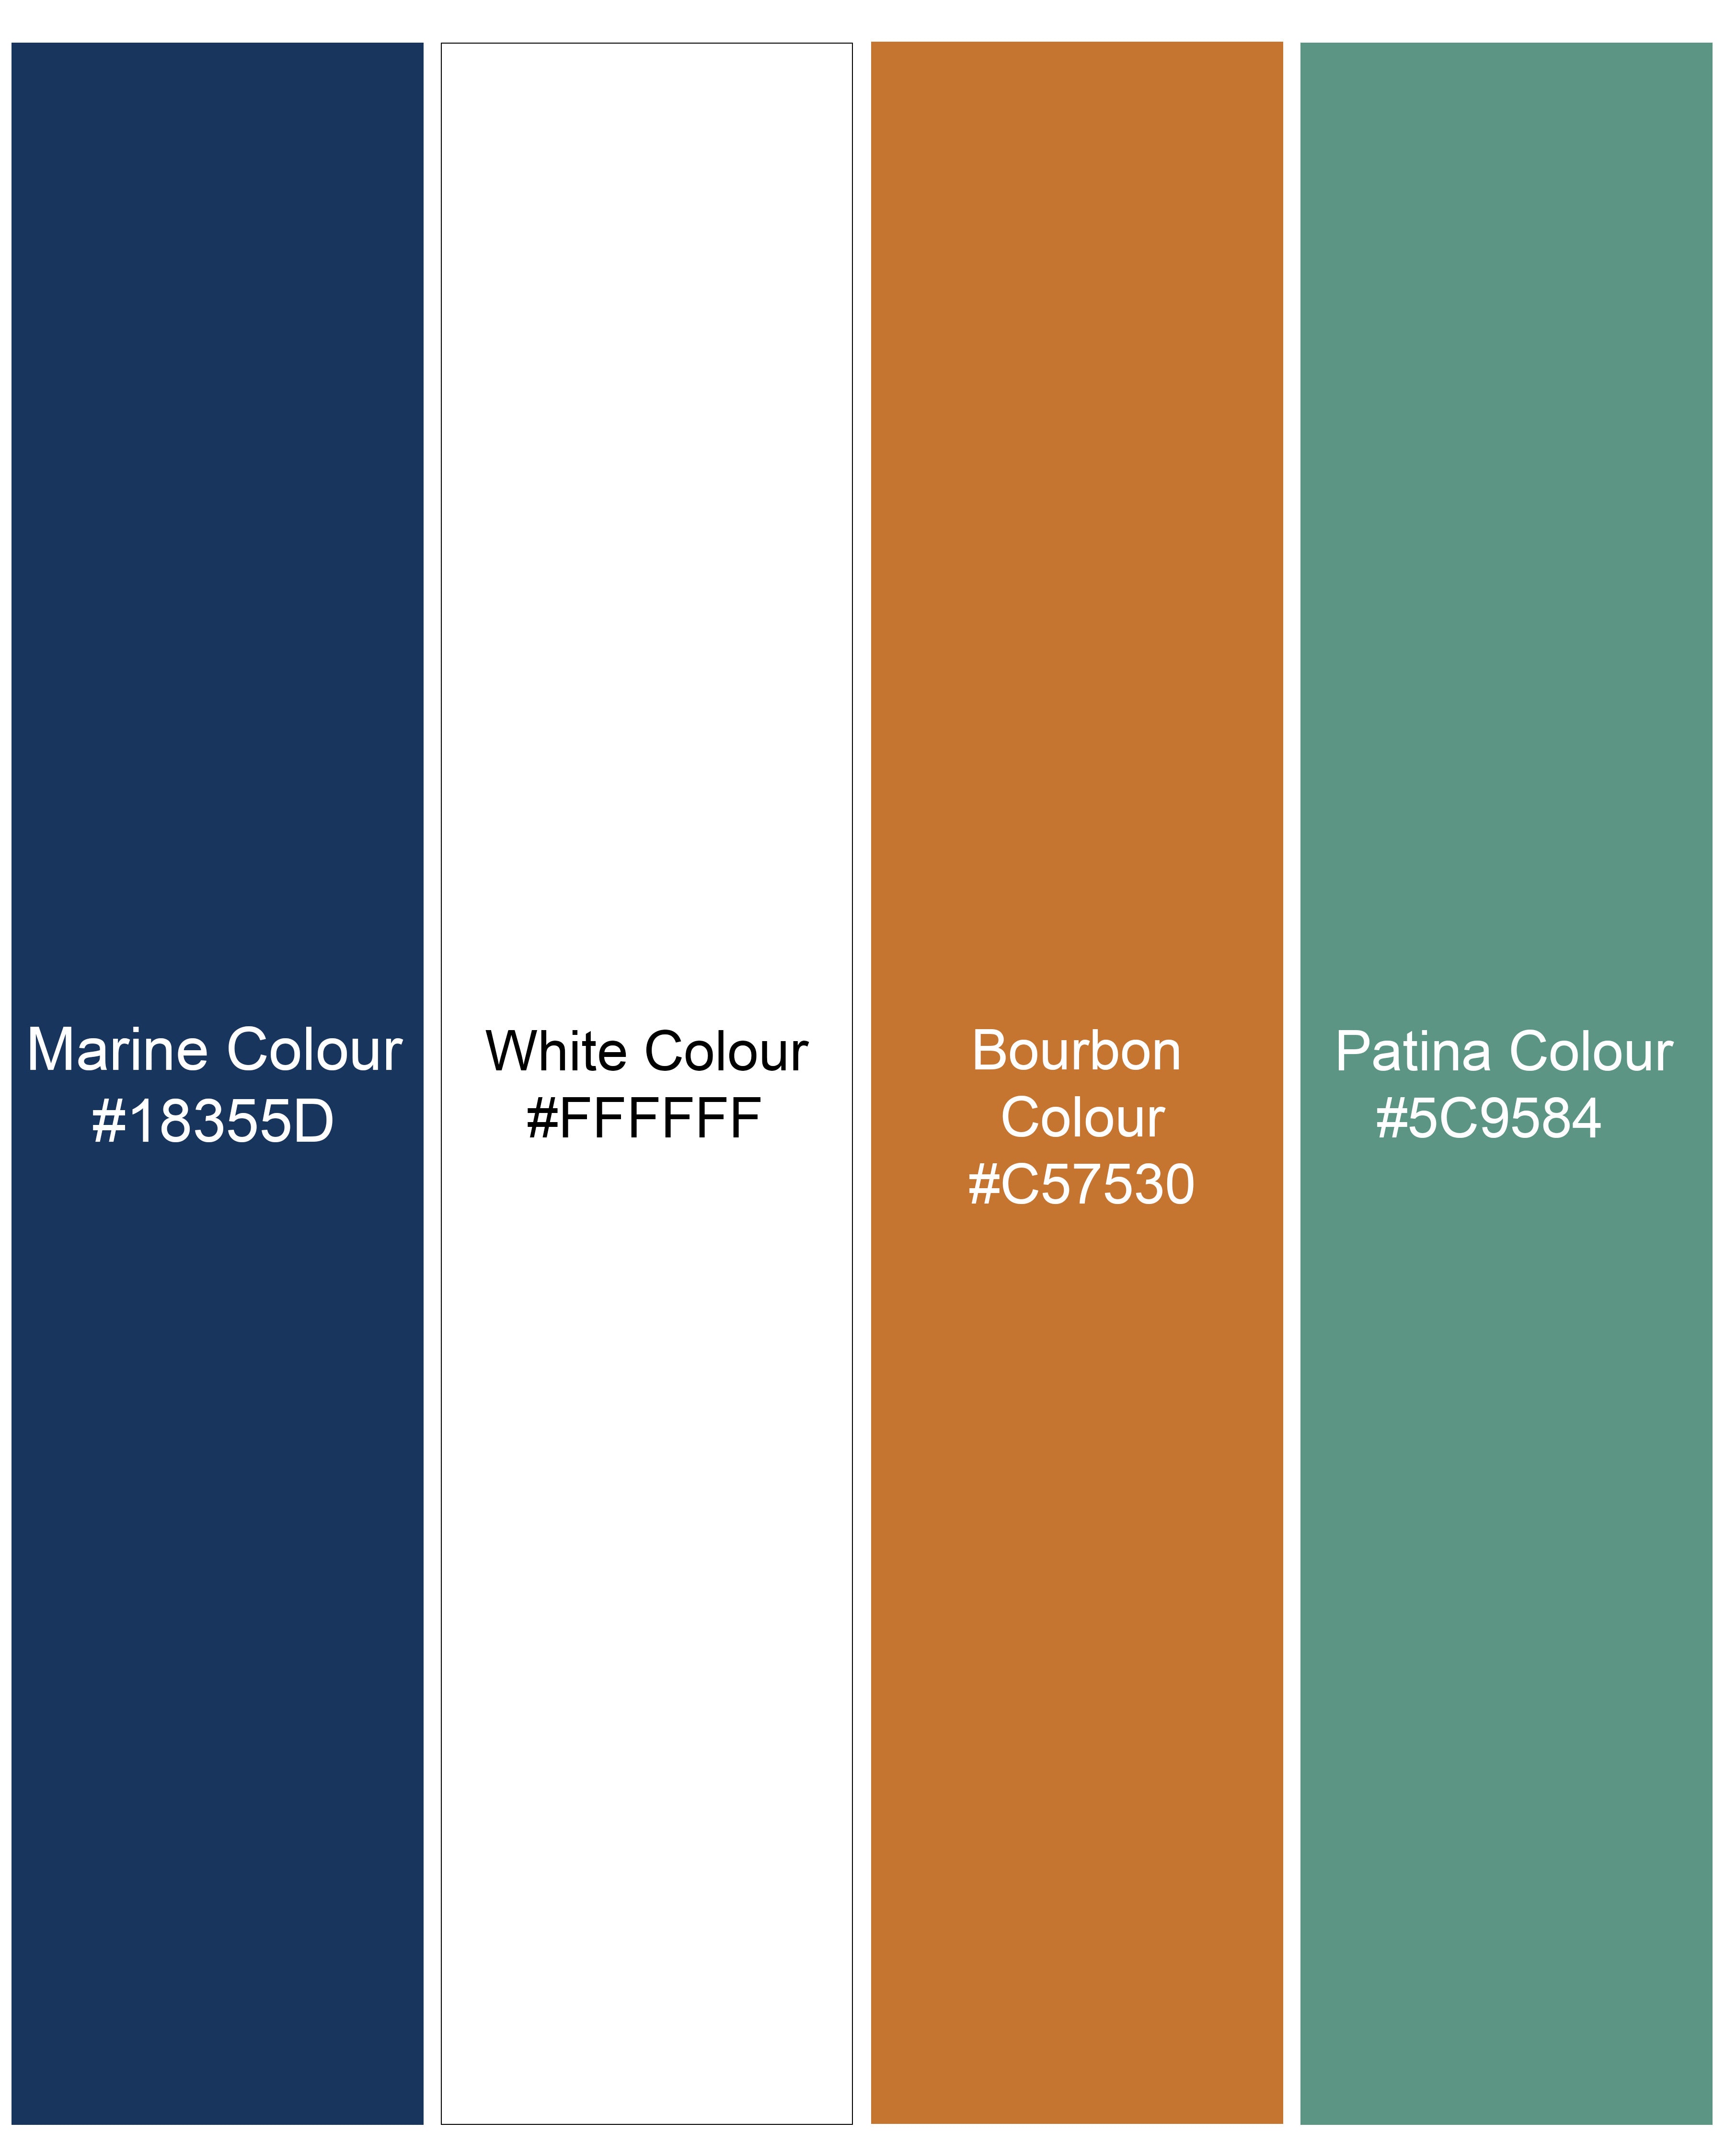 Marine Blue and White Multicolour Ditsy Textured Premium Tencel Shorts SR247-28, SR247-30, SR247-32, SR247-34, SR247-36, SR247-38, SR247-40, SR247-42, SR247-44